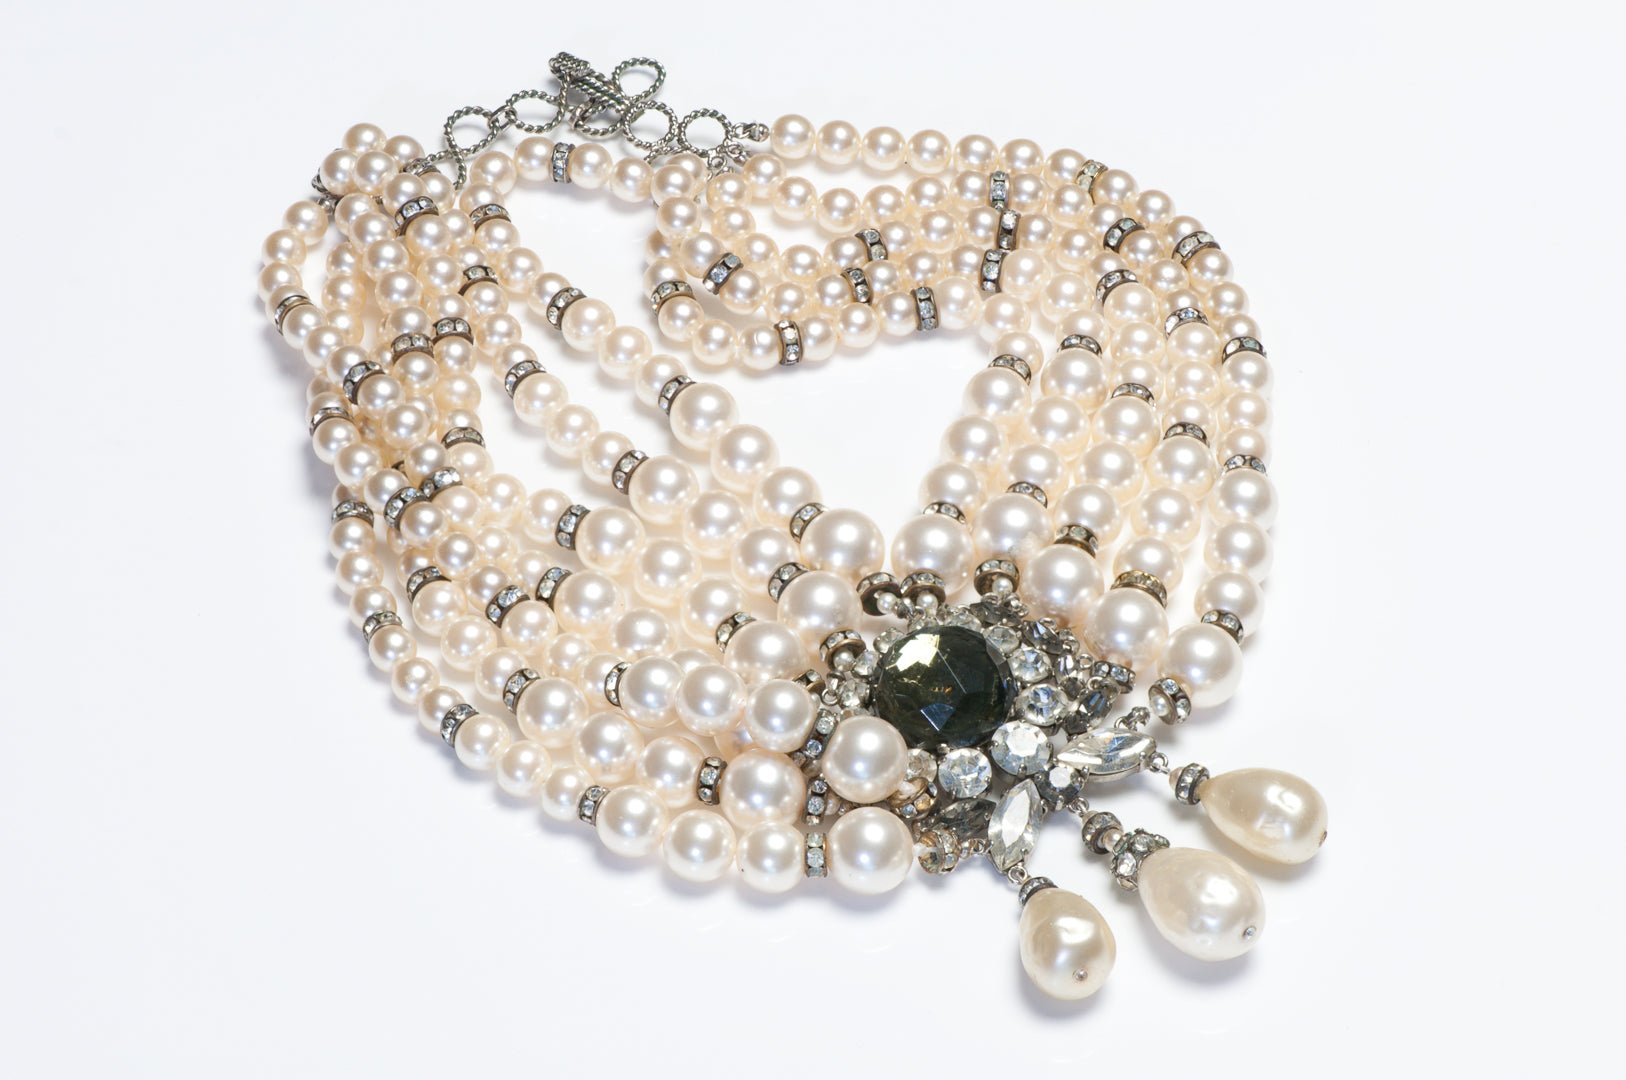 Christian Dior Couture 1950's Roger Jean-Pierre Pearl Crystal Choker Necklace - DSF Antique Jewelry